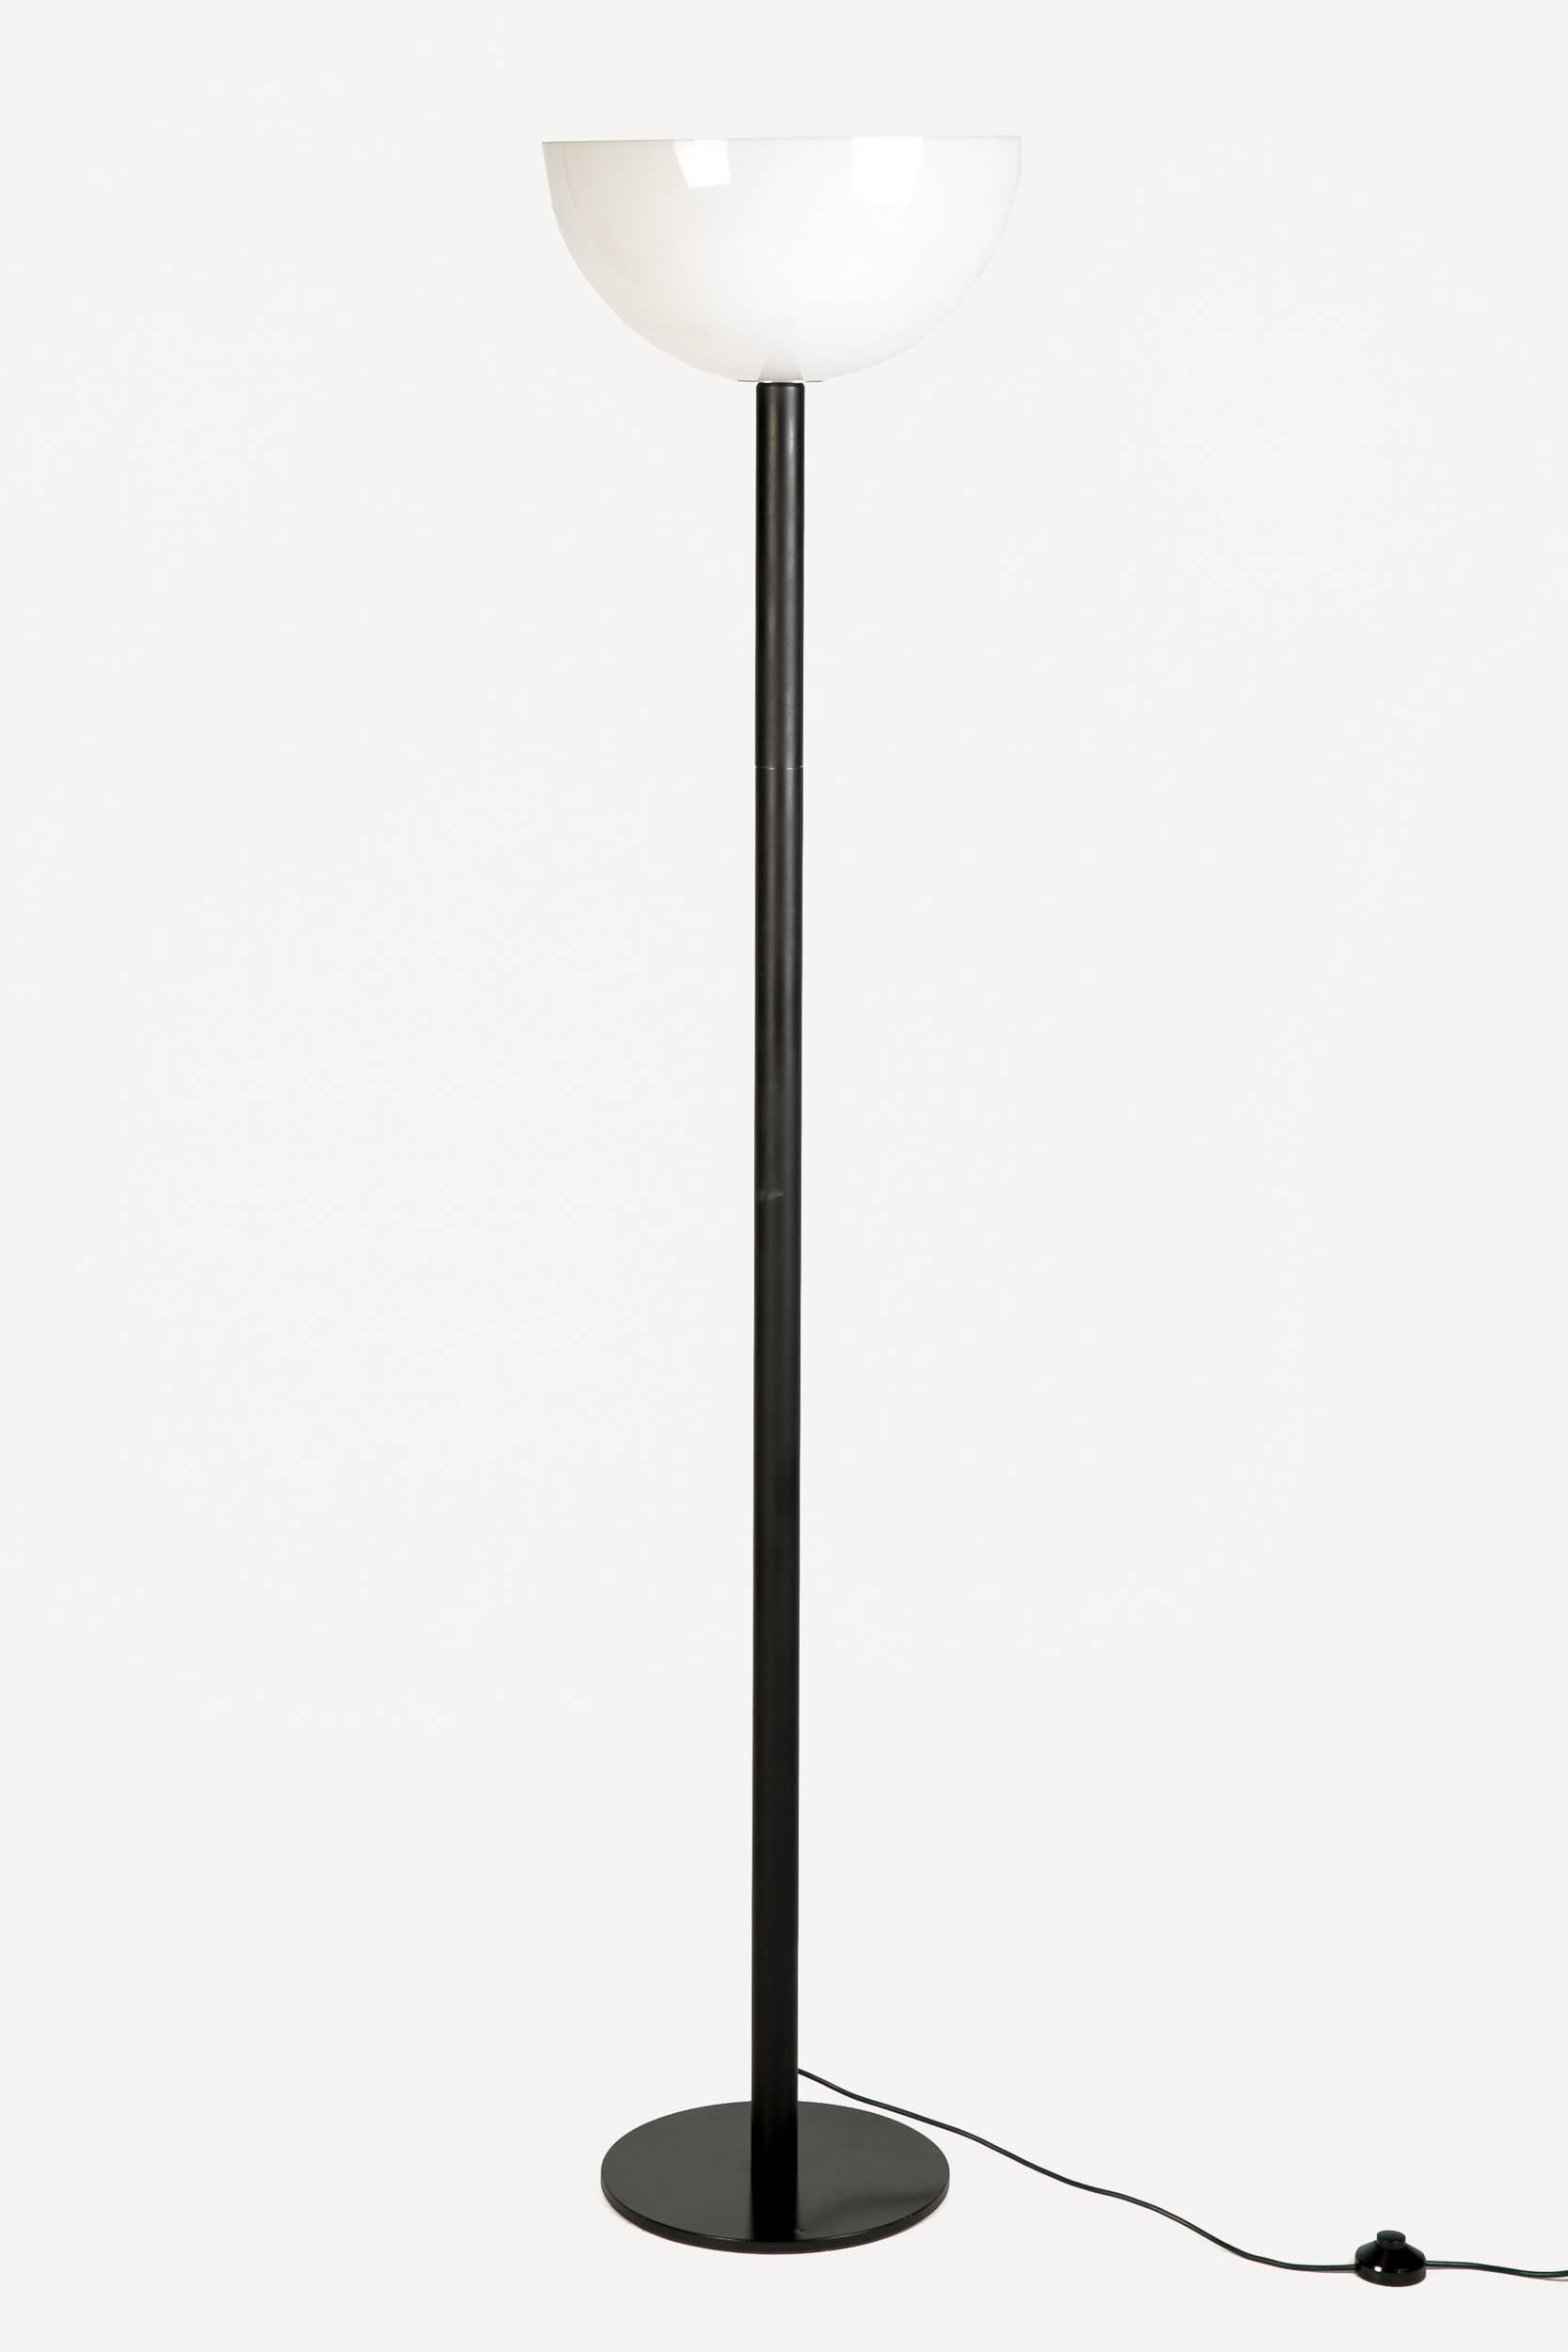 Beautiful Baltensweiler floor lamp by Ueli bergère, manufactured in the 1970s in Switzerland. Flexible aluminium tube, the lampshade can be brought in various kinds of position. Lampshade made of white plastic, stem of black powder-coated metal.